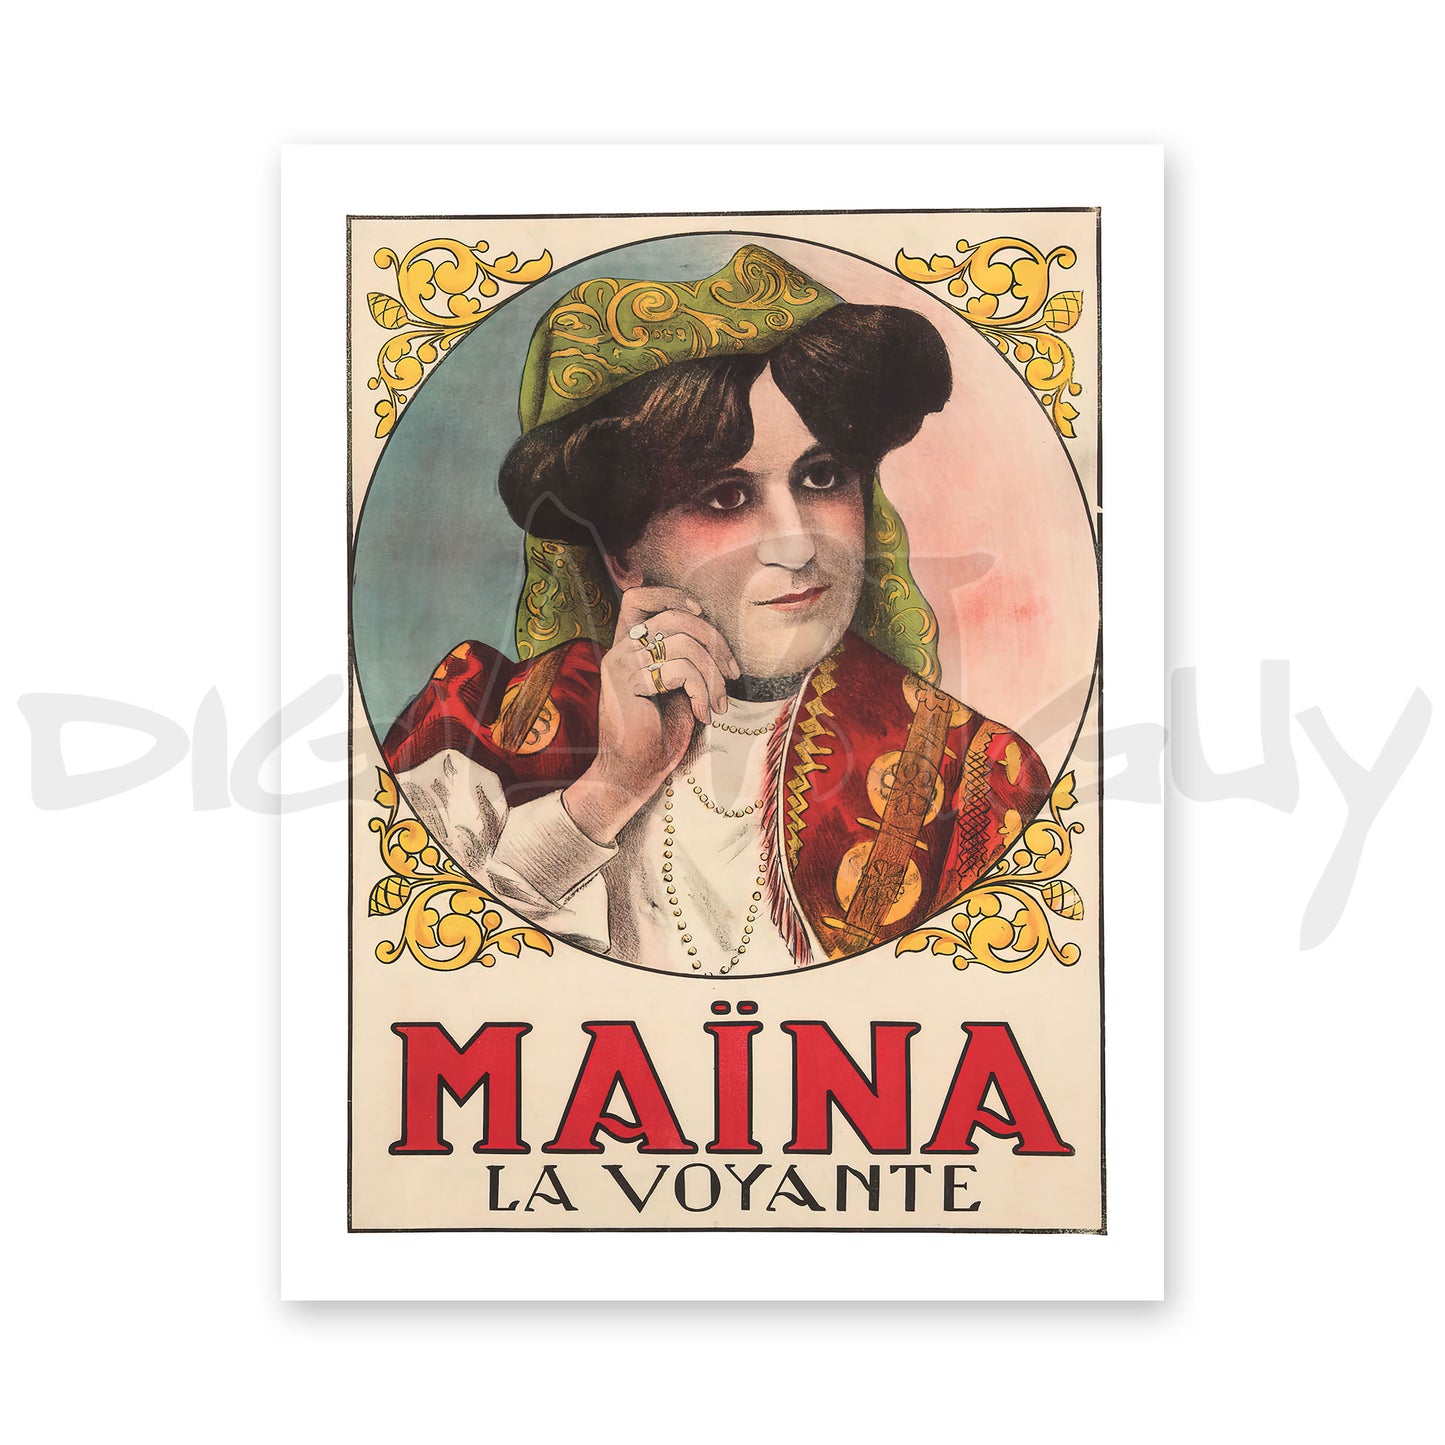 Maïna La Voyante by Louis Galice - Advertisement poster from the Friends tv show